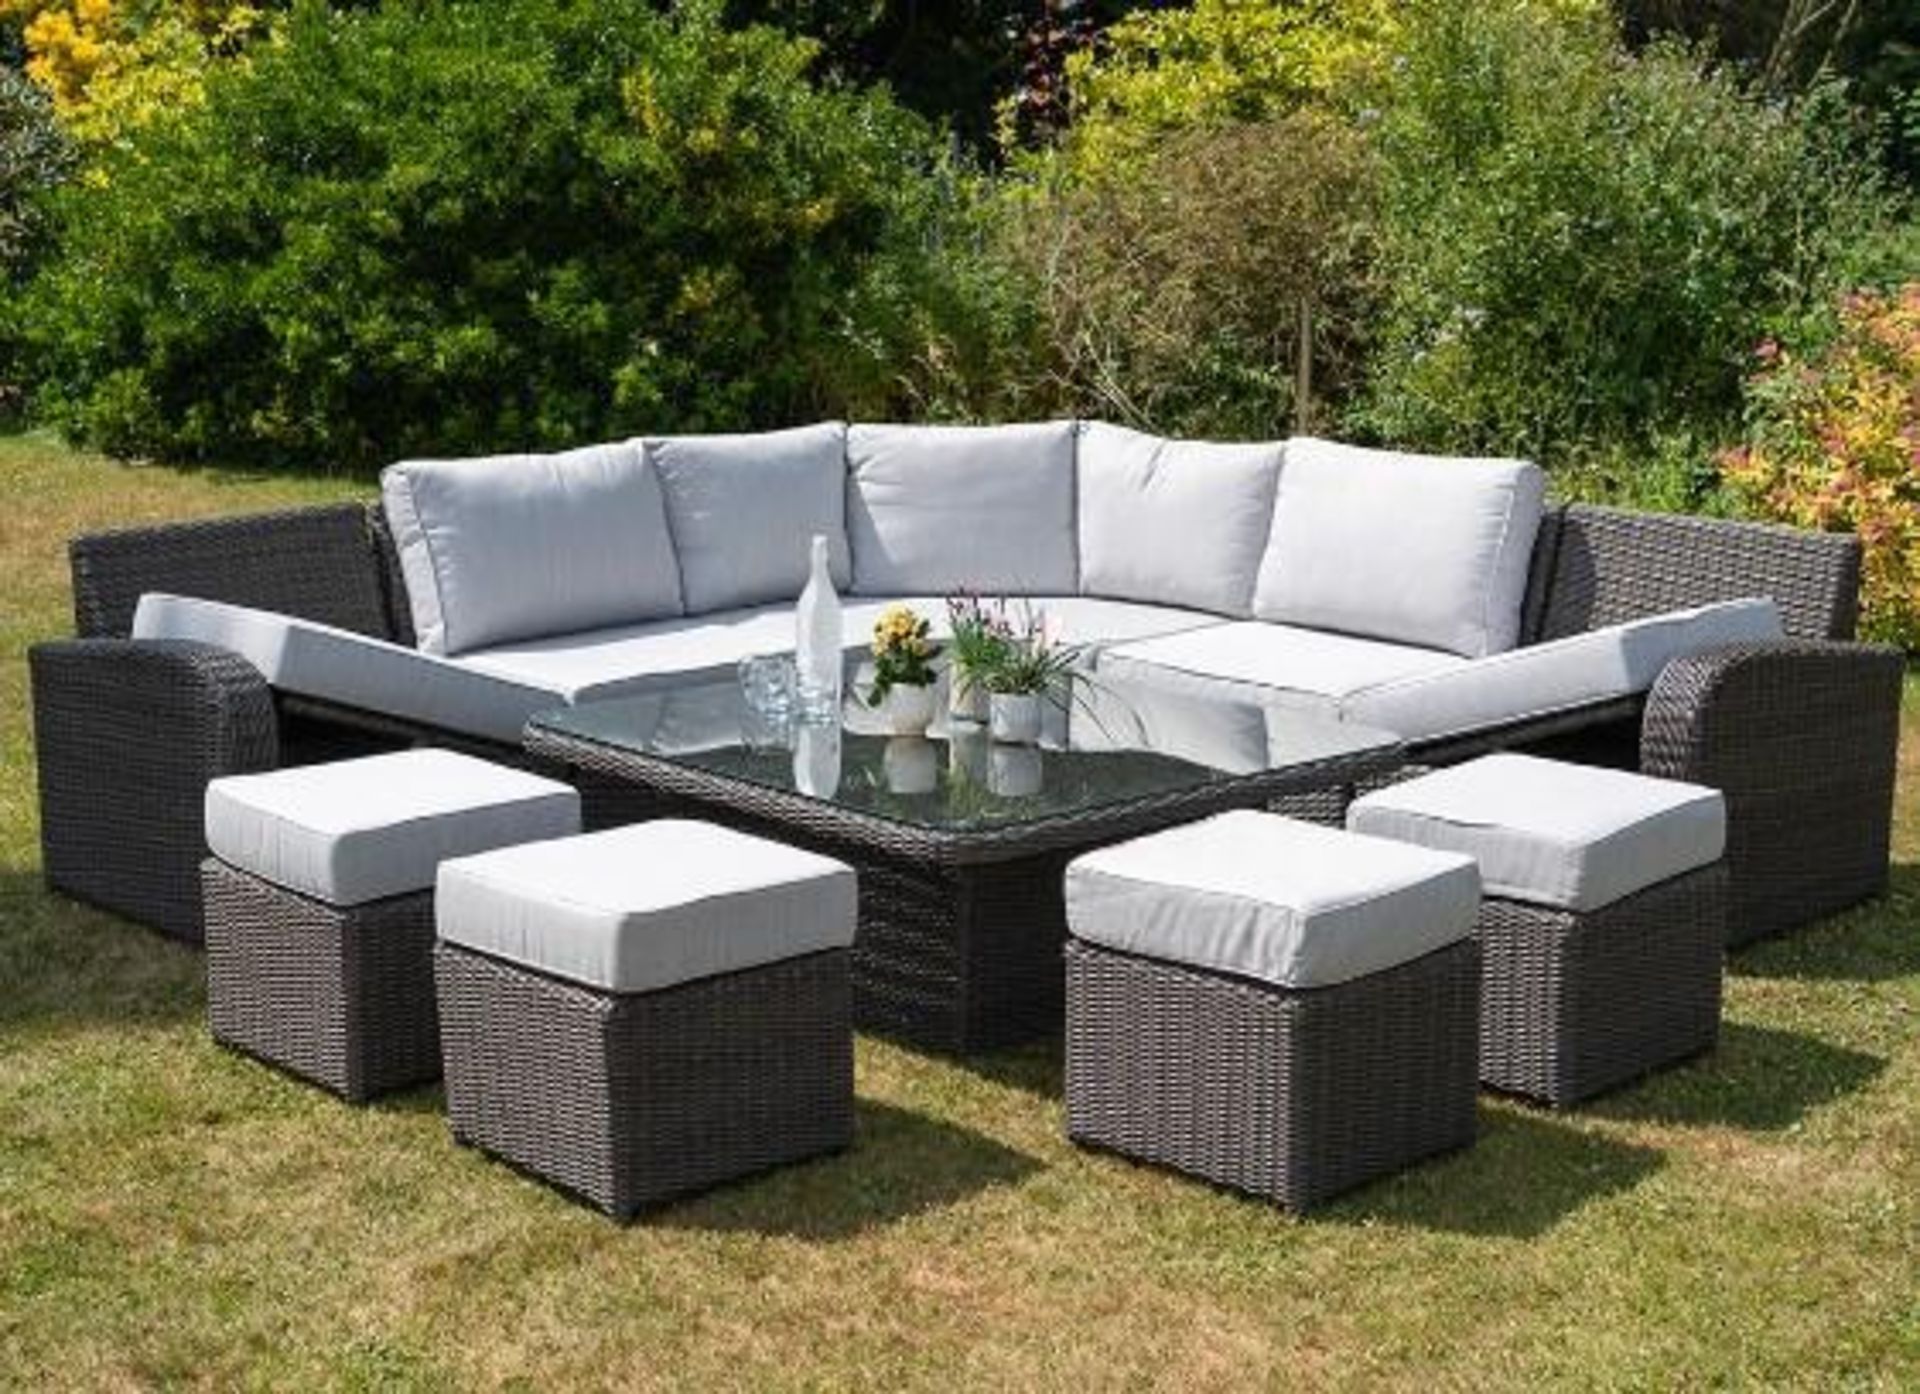 Brand New Moda Furniture, 10 Seater Outdoor Rise and Fall Table Dining Set in Grey with Grey - Image 2 of 12